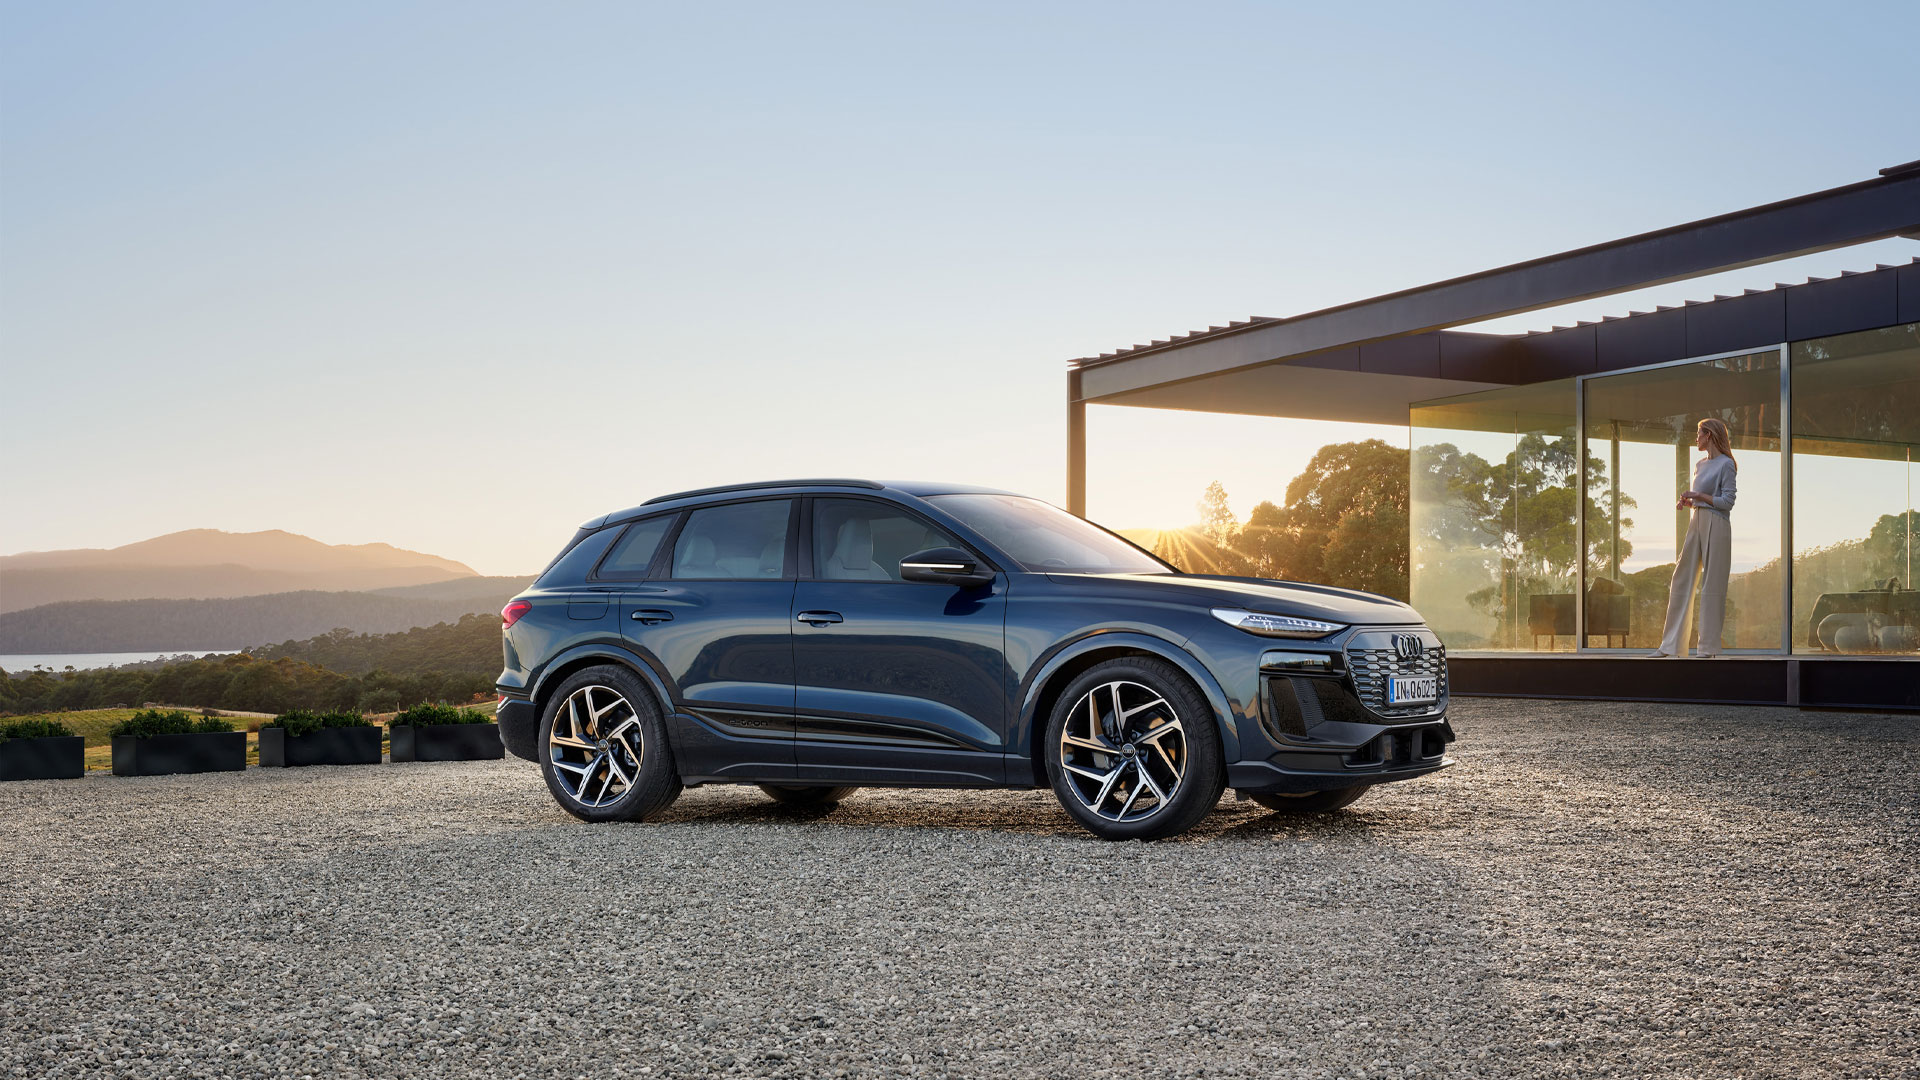 Three-quarter side view of the Audi Q6 e-tron parked next to a modern house.